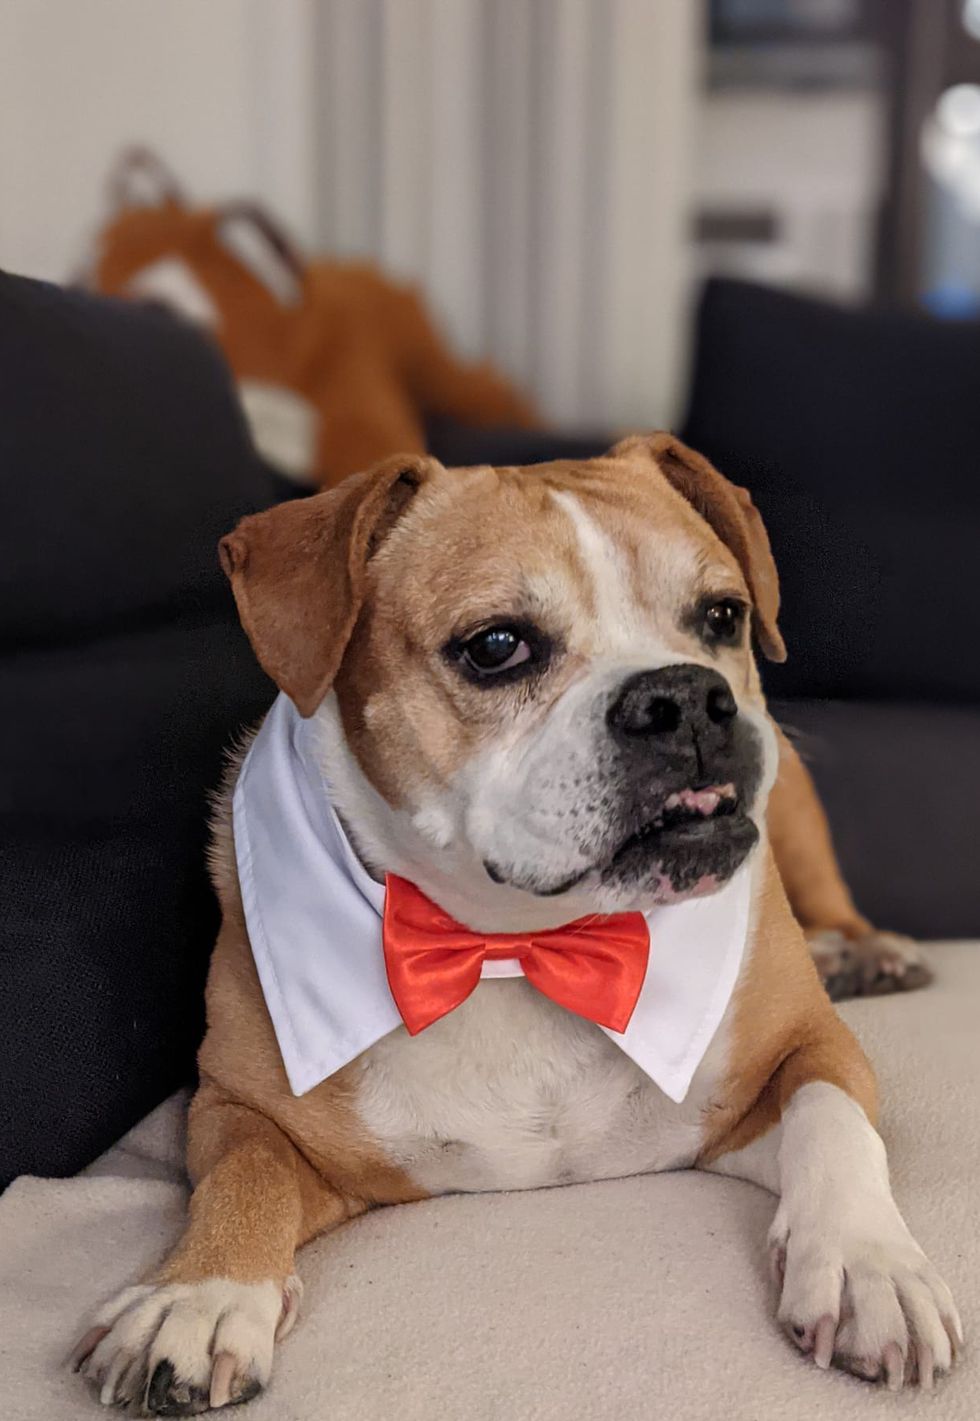 a dog wearing a bow tie